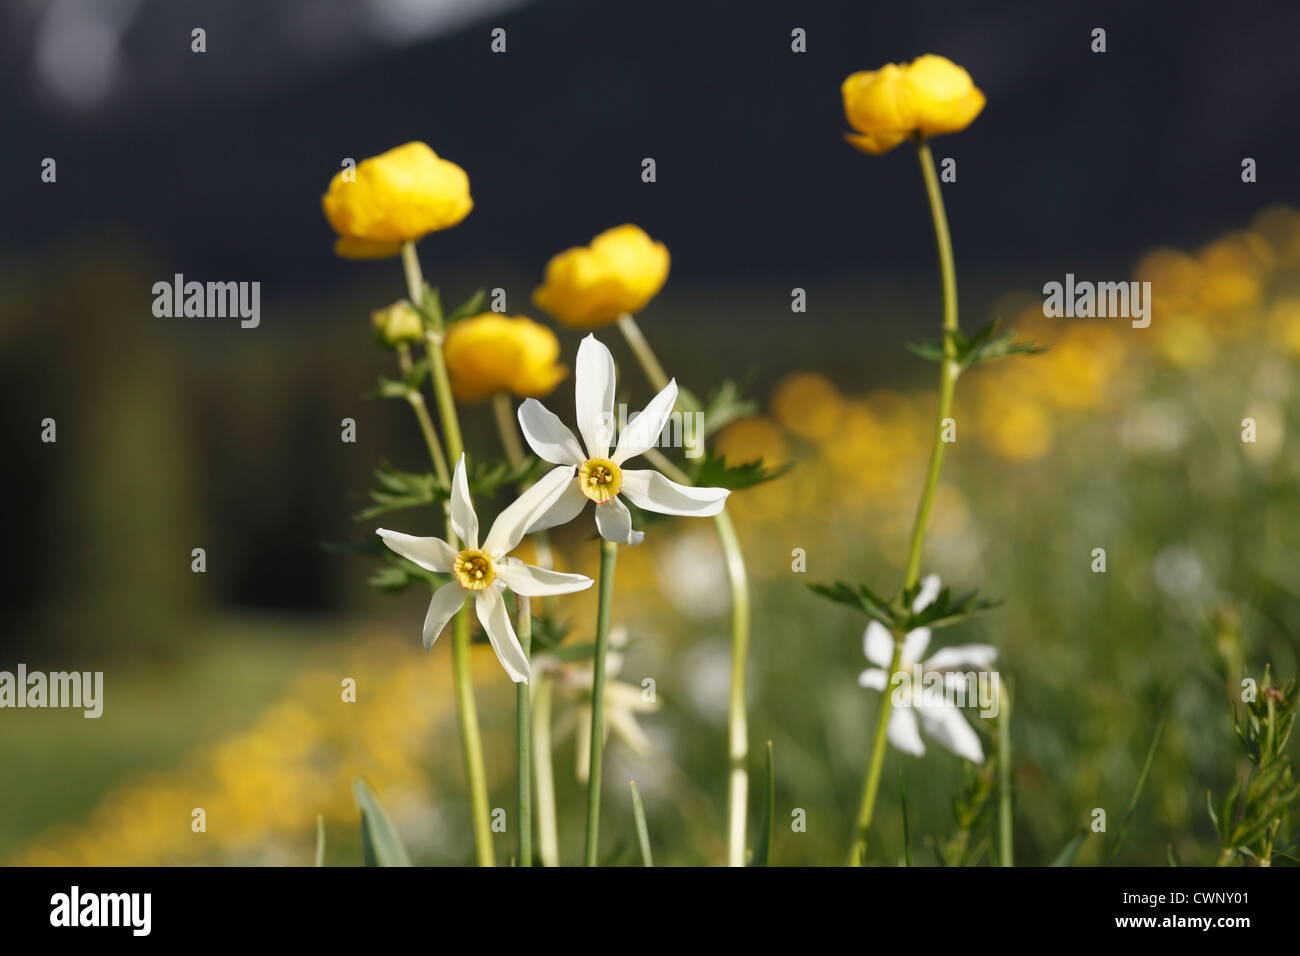 Austria, Styria, Ausseer Land, Daffodils and globe flowers in meadow Stock Photo